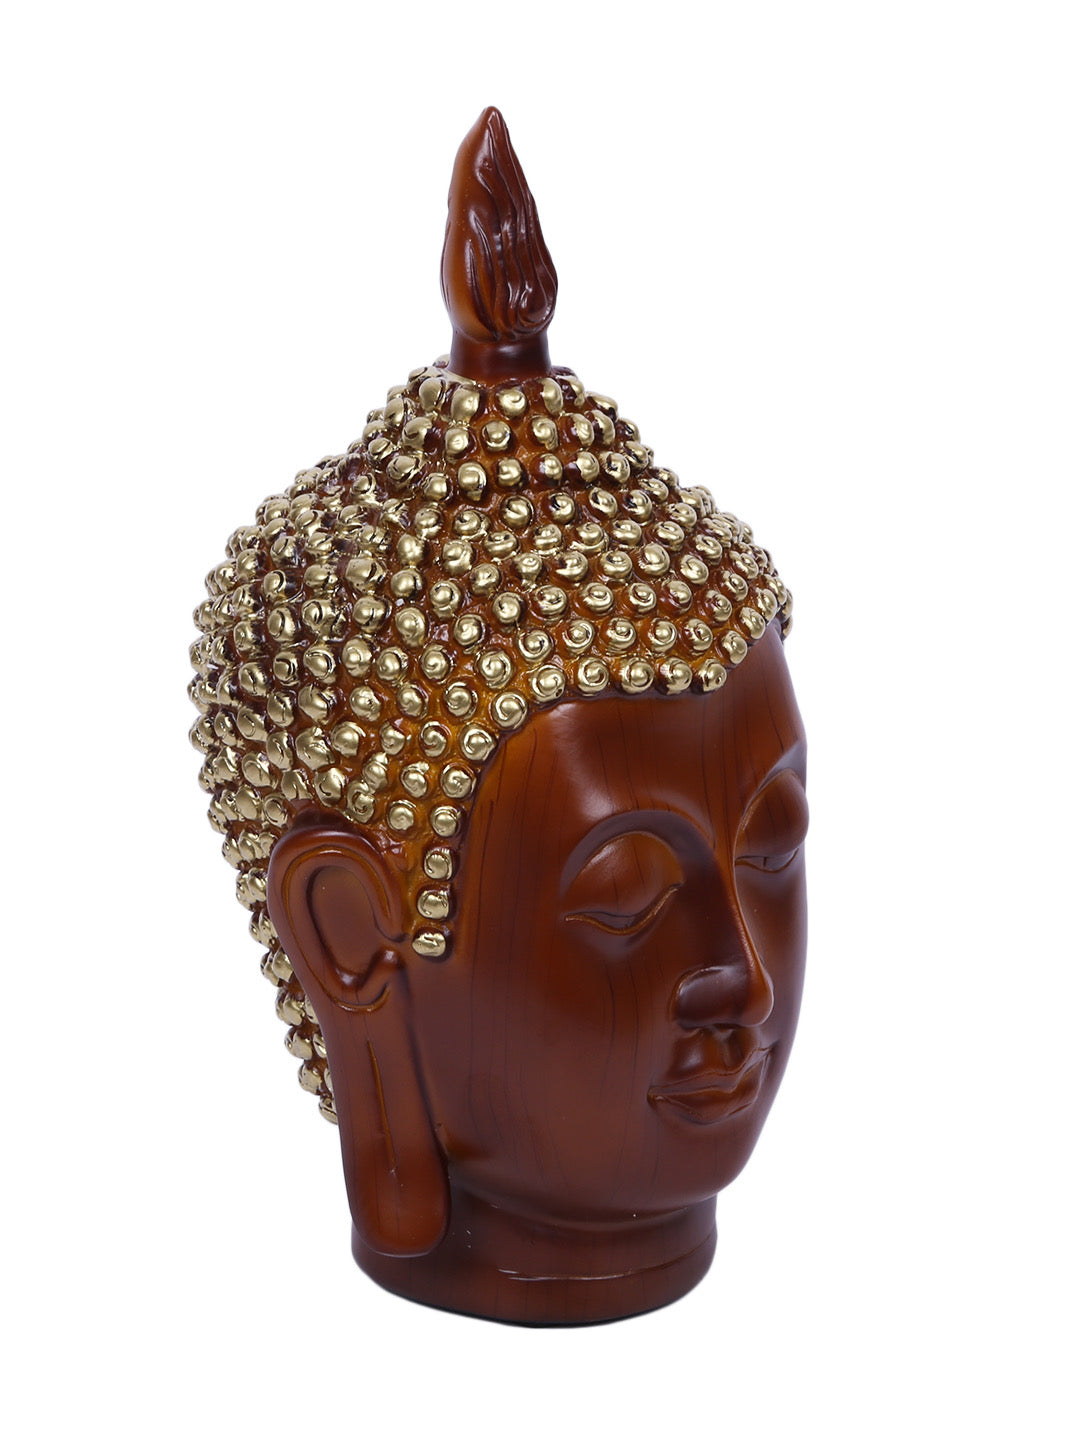 Buddha Face Resin Art with Wooden Vibe - Default Title (REF19469)